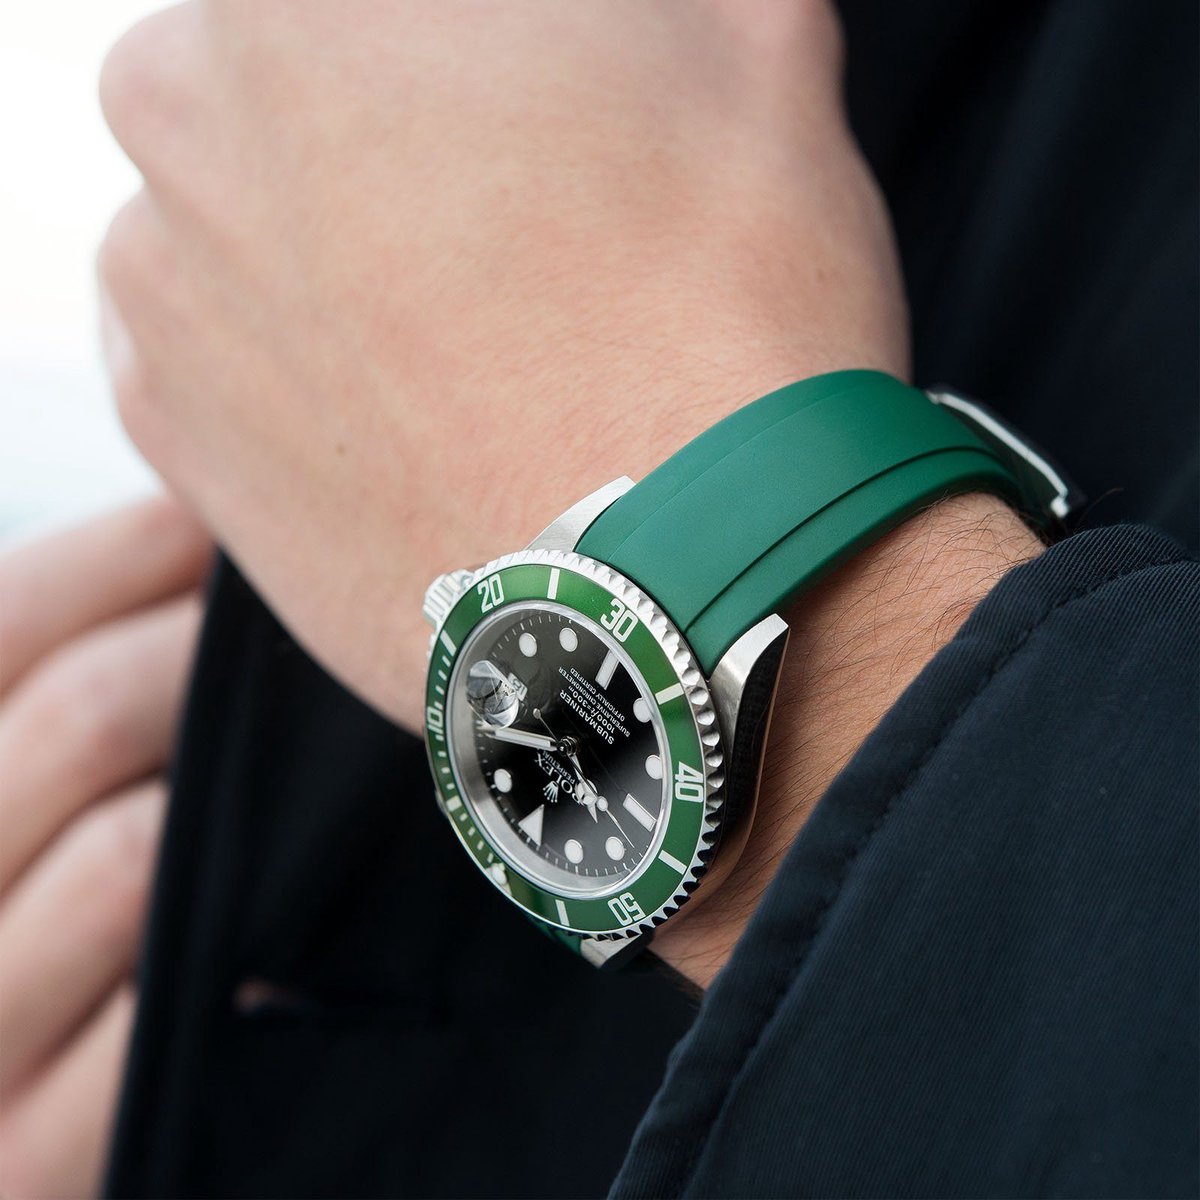 BS Rubber Style Horlogeband - Everest Curved End Green With Tang Buckle - ONLY For Modern Rolex - 20mm